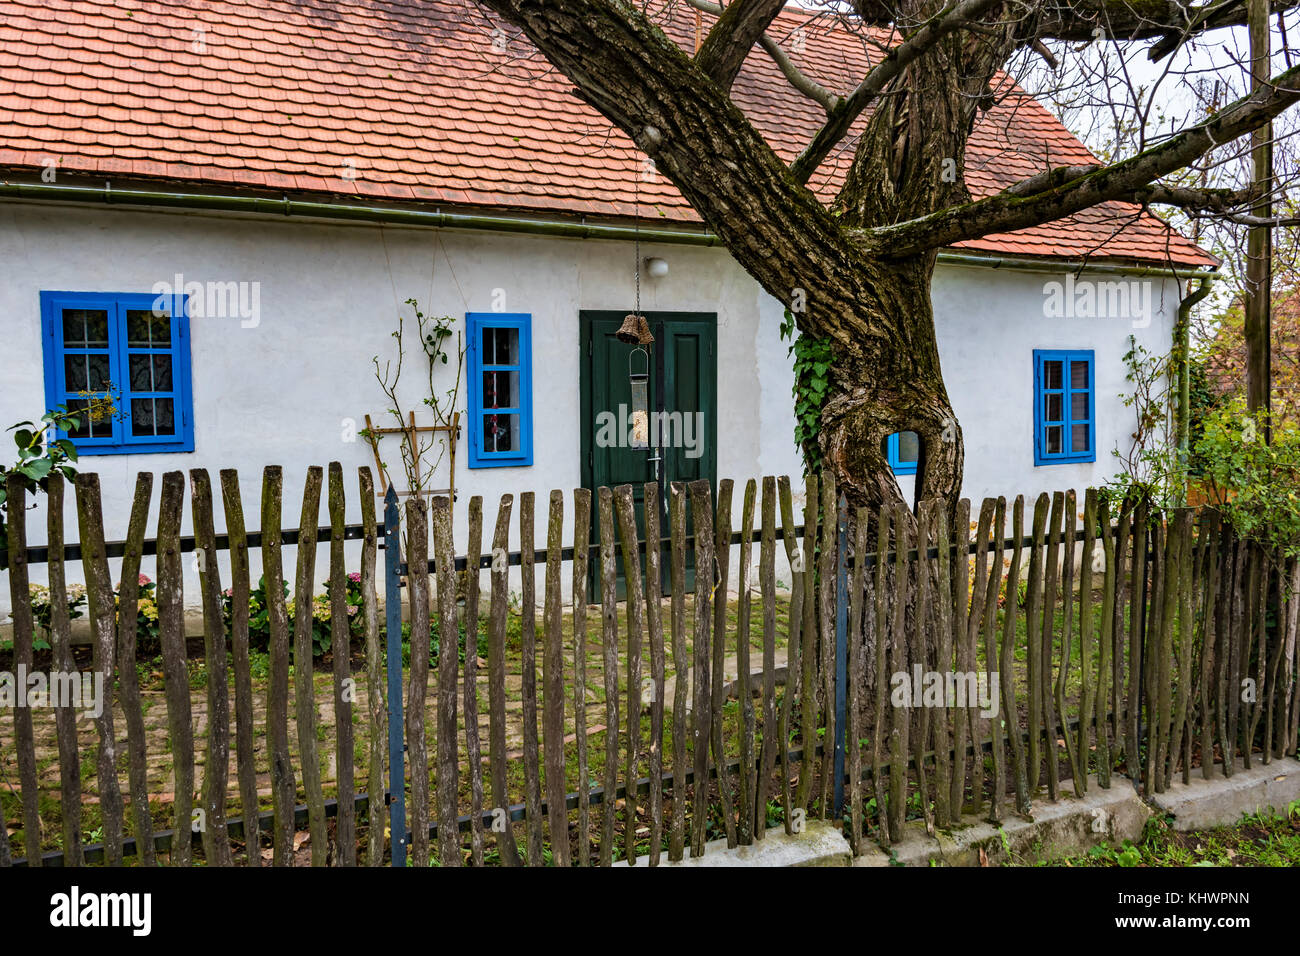 Colorful old Anabaptist house in Velke Levare (Slovakia) Stock Photo